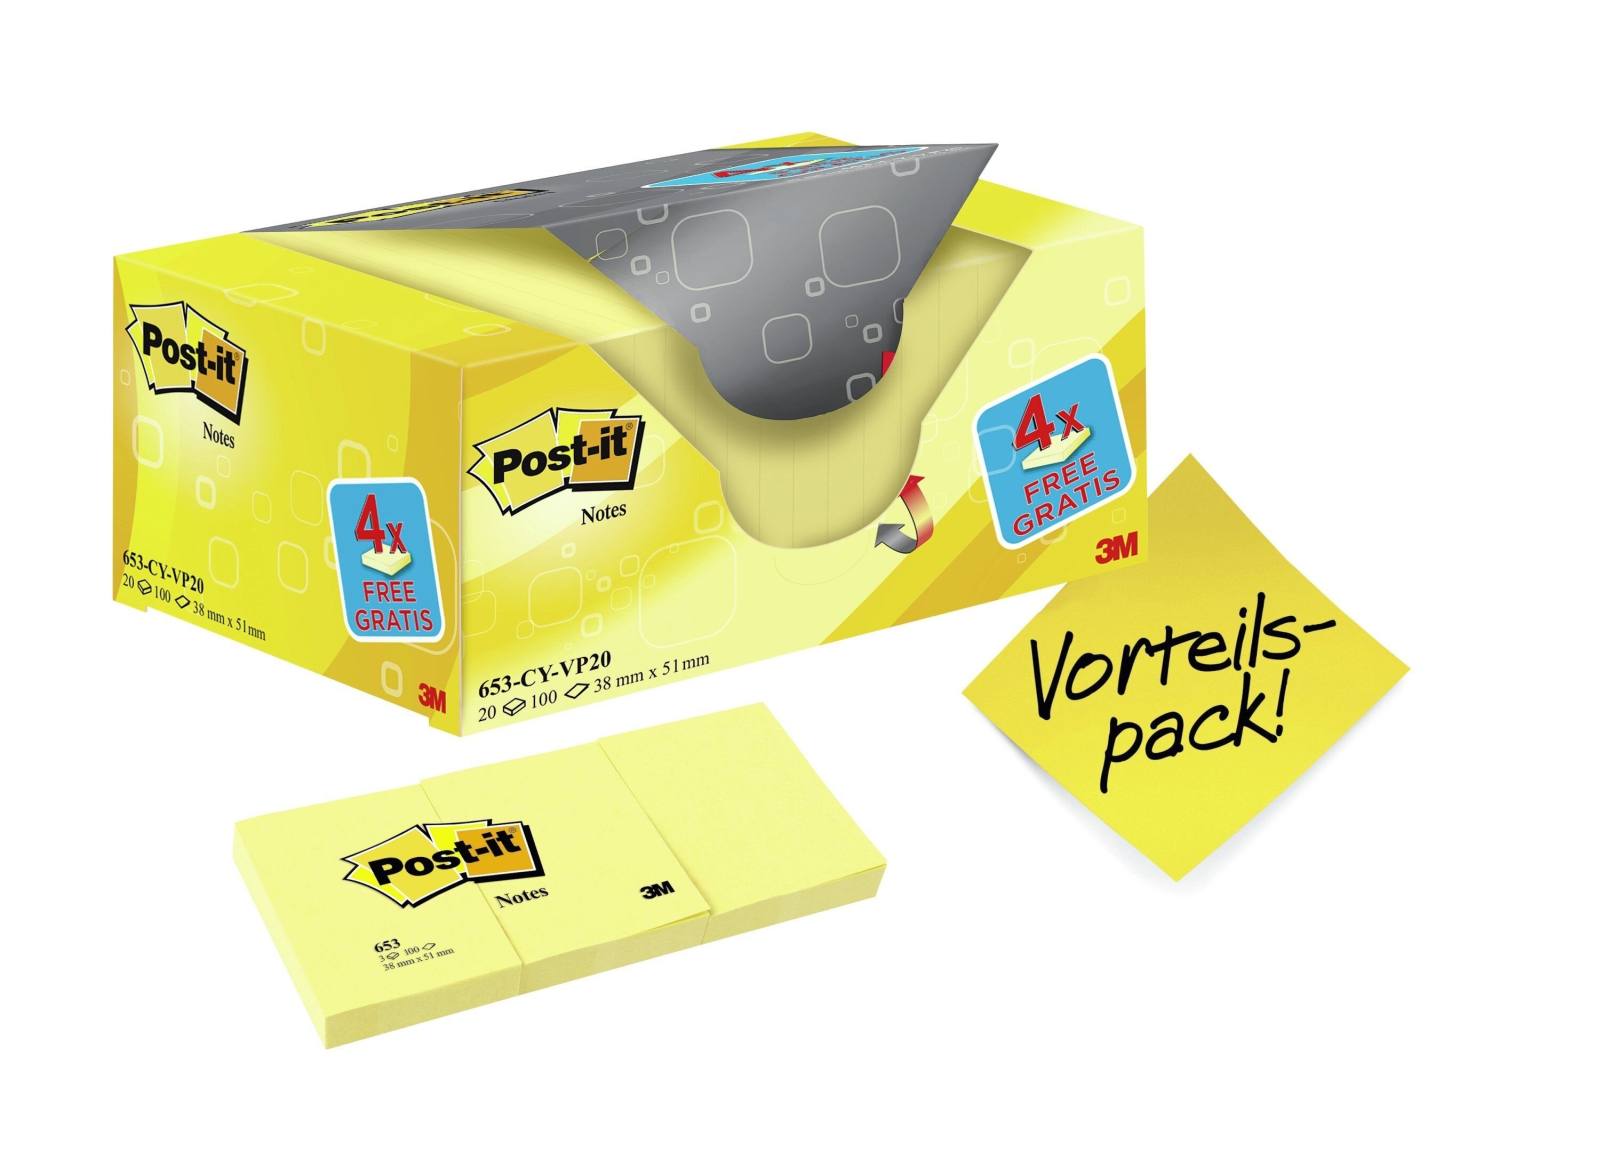 3M Post-it Notes Promotion 653Y-20, 20 pads of 100 sheets in a box at a special price, yellow, 51 mm x 38 mm